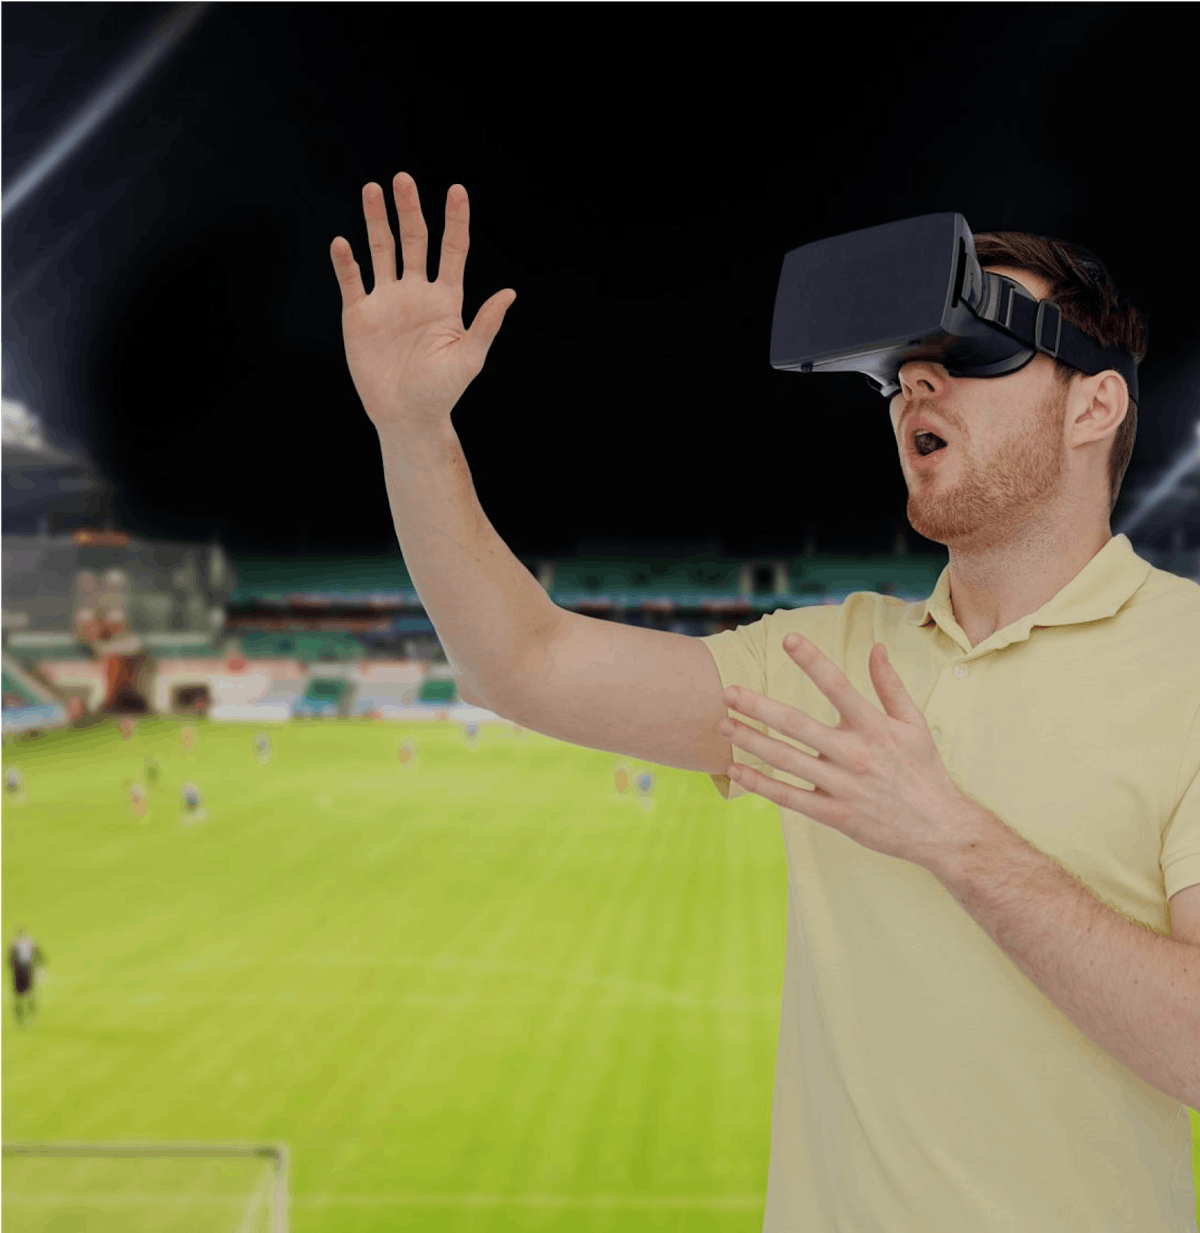 AR/VR in Sports